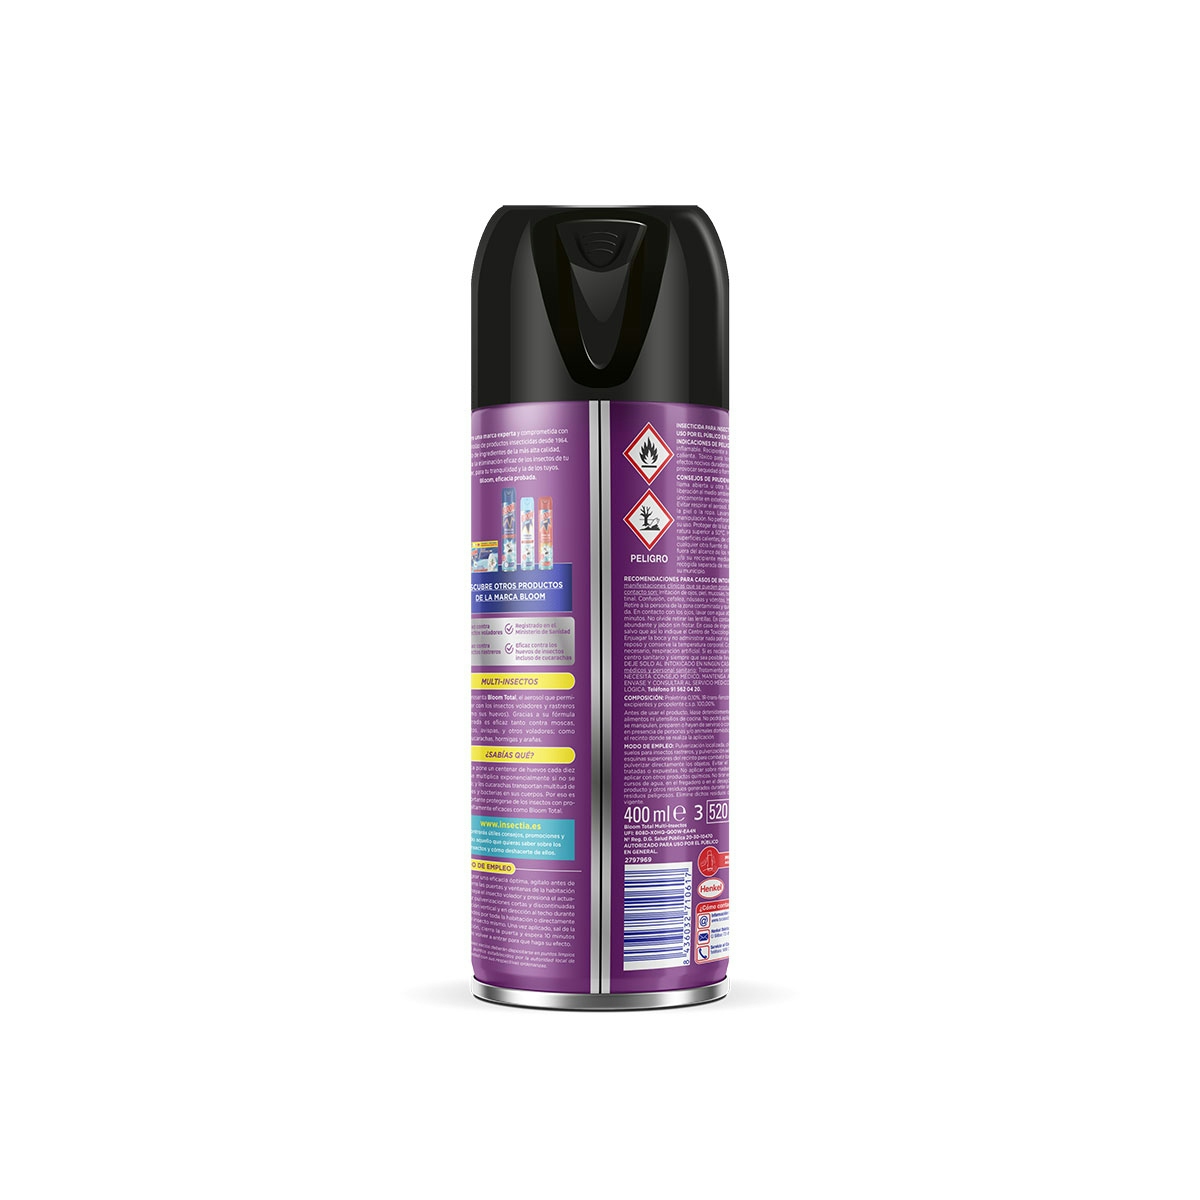 Bloom Total Insectos 400ml